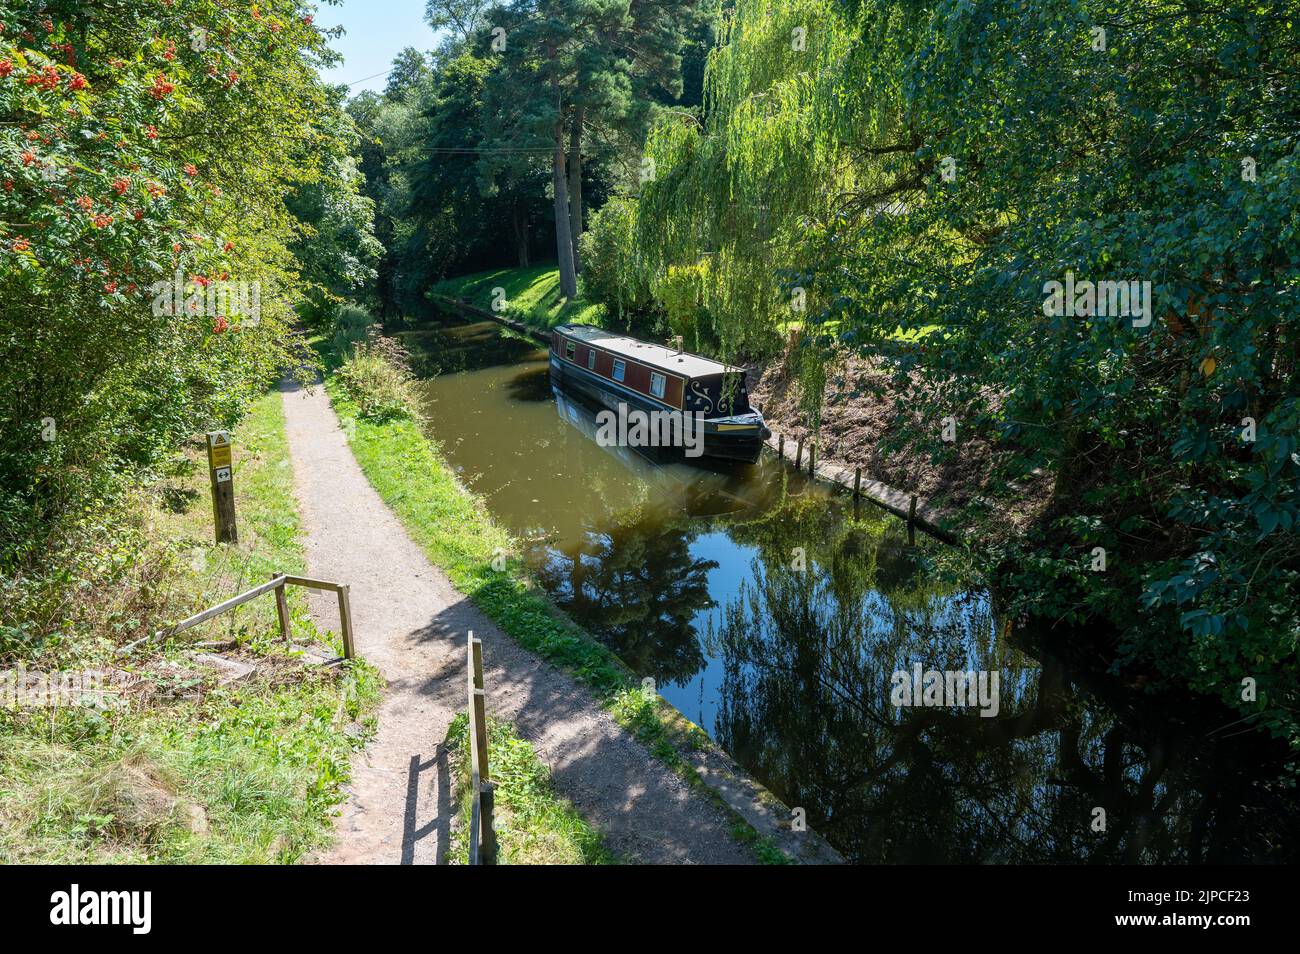 Narrowboat moored on the Caldon canal in Staffordshire in bright sunshine amongst trees and shrubs. Stock Photo